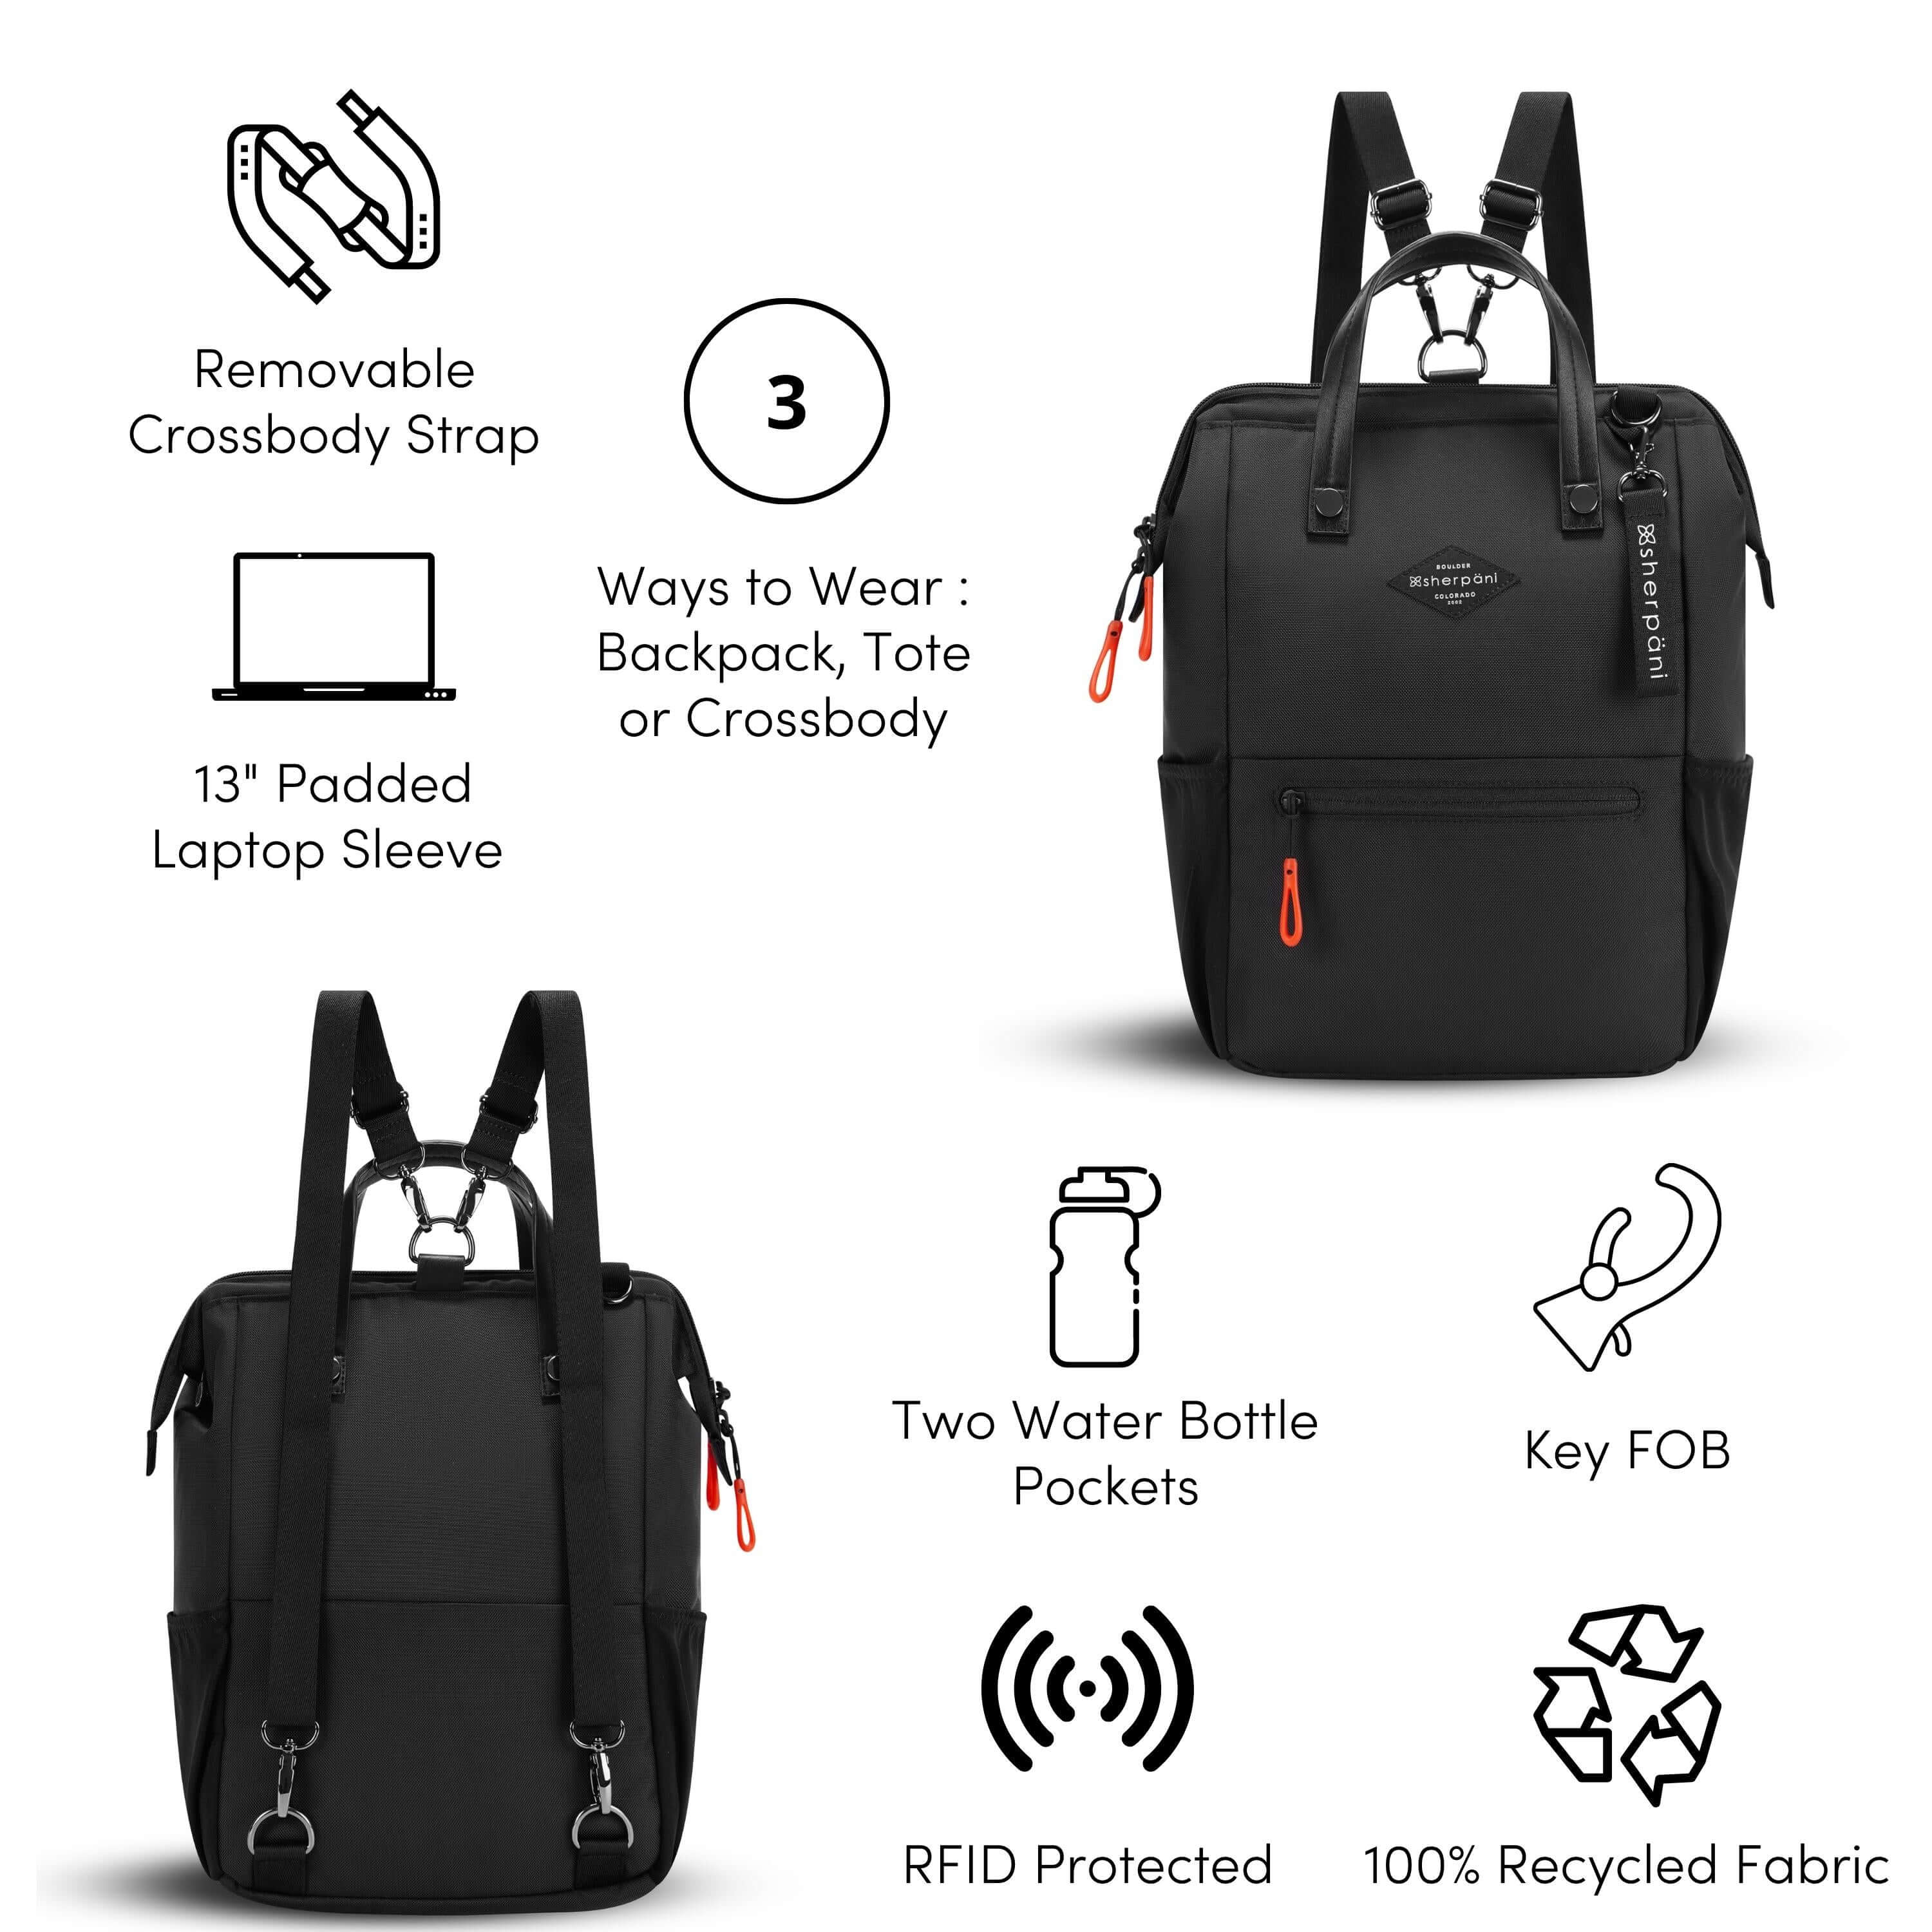 A Graphic showing the features of Sherpani’s crossbody, the Dispatch. There is a front and back view of the bag. The following features are highlighted with corresponding graphics: Removable Crossbody Strap, 13" Padded Laptop Sleeve, 3 Ways to Wear: Backpack, Tote or Crossbody, Two Water Bottle Pockets, Key FOB, RFID Protected, 100% Recycled Fabric. 